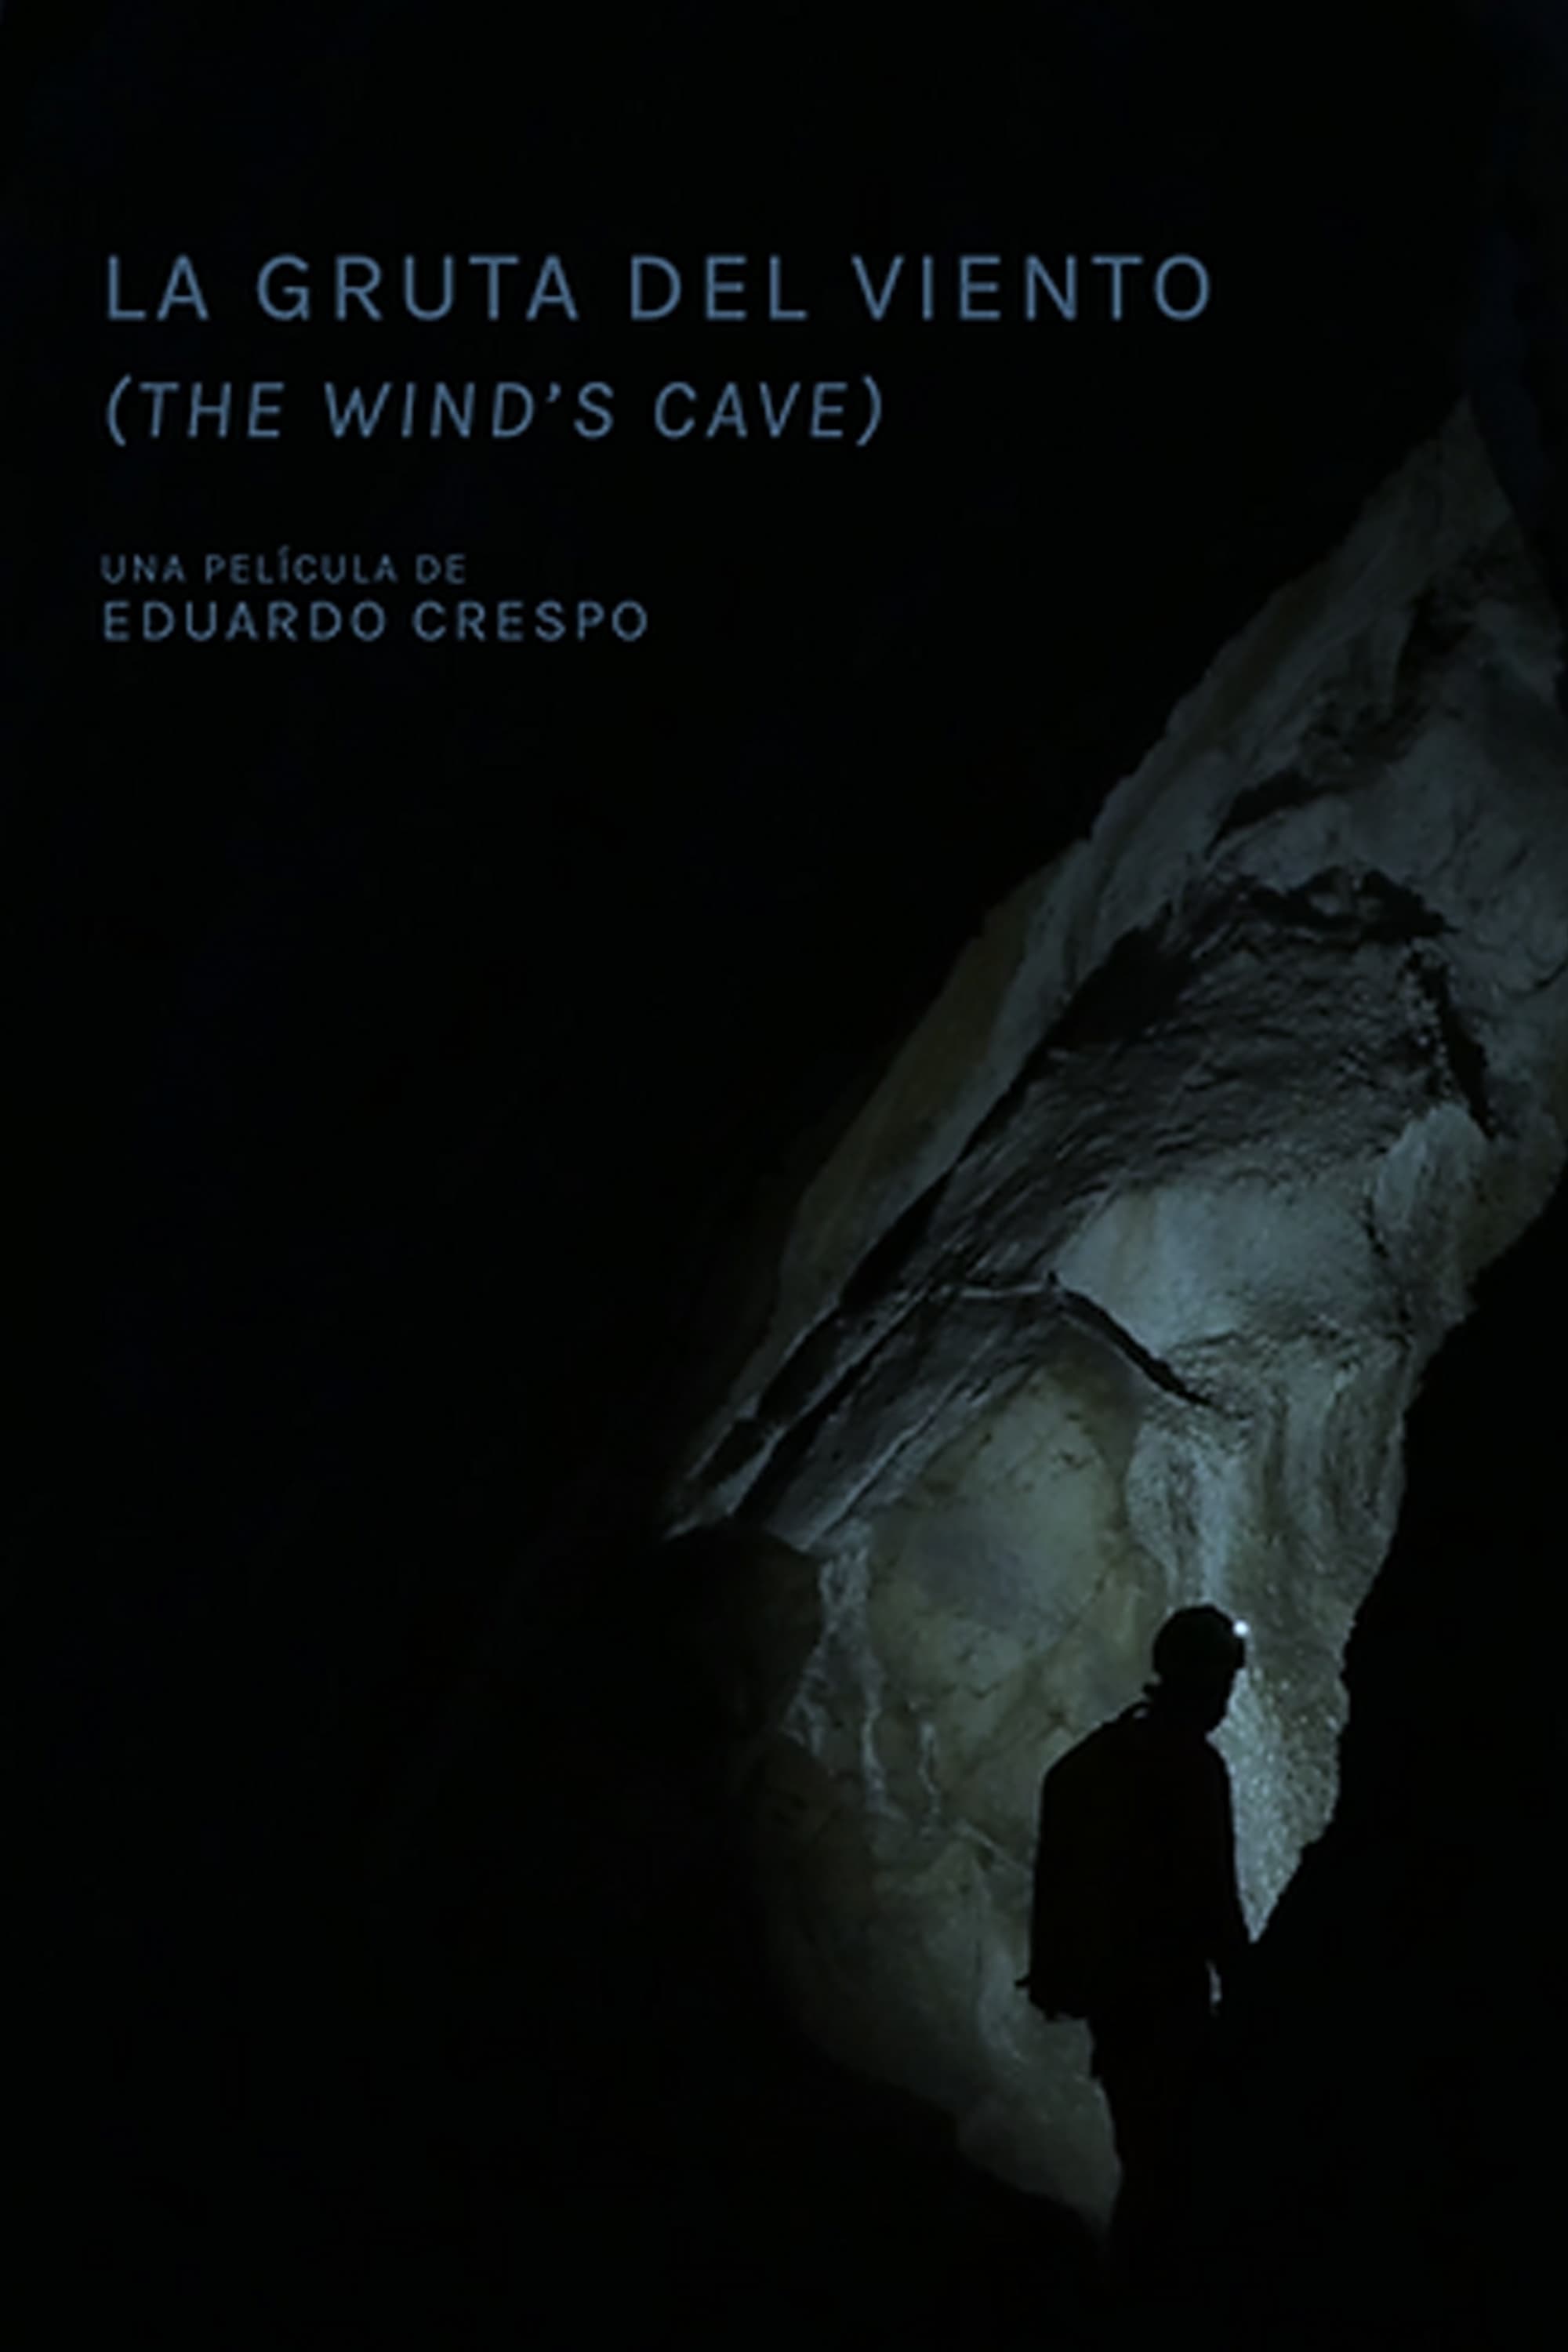 The Wind's Cave